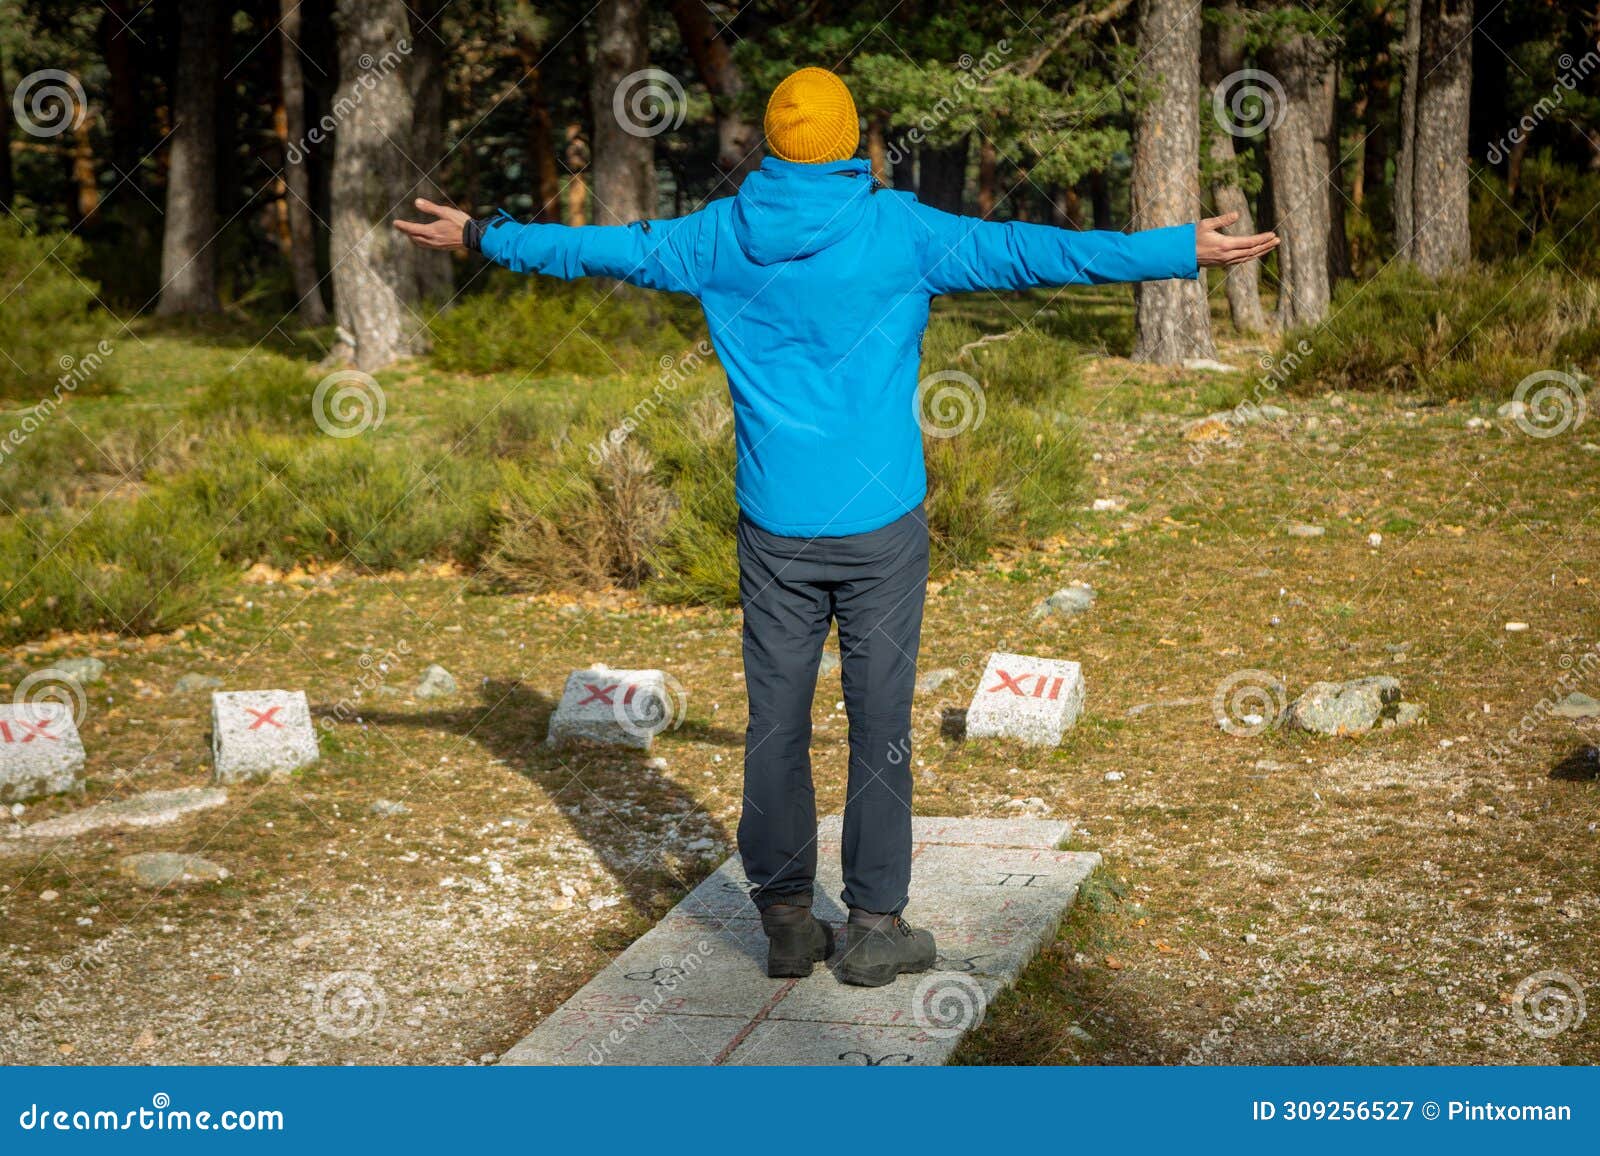 young man hiker with stone sundial in the middle of the forest in cercedilla, madrid